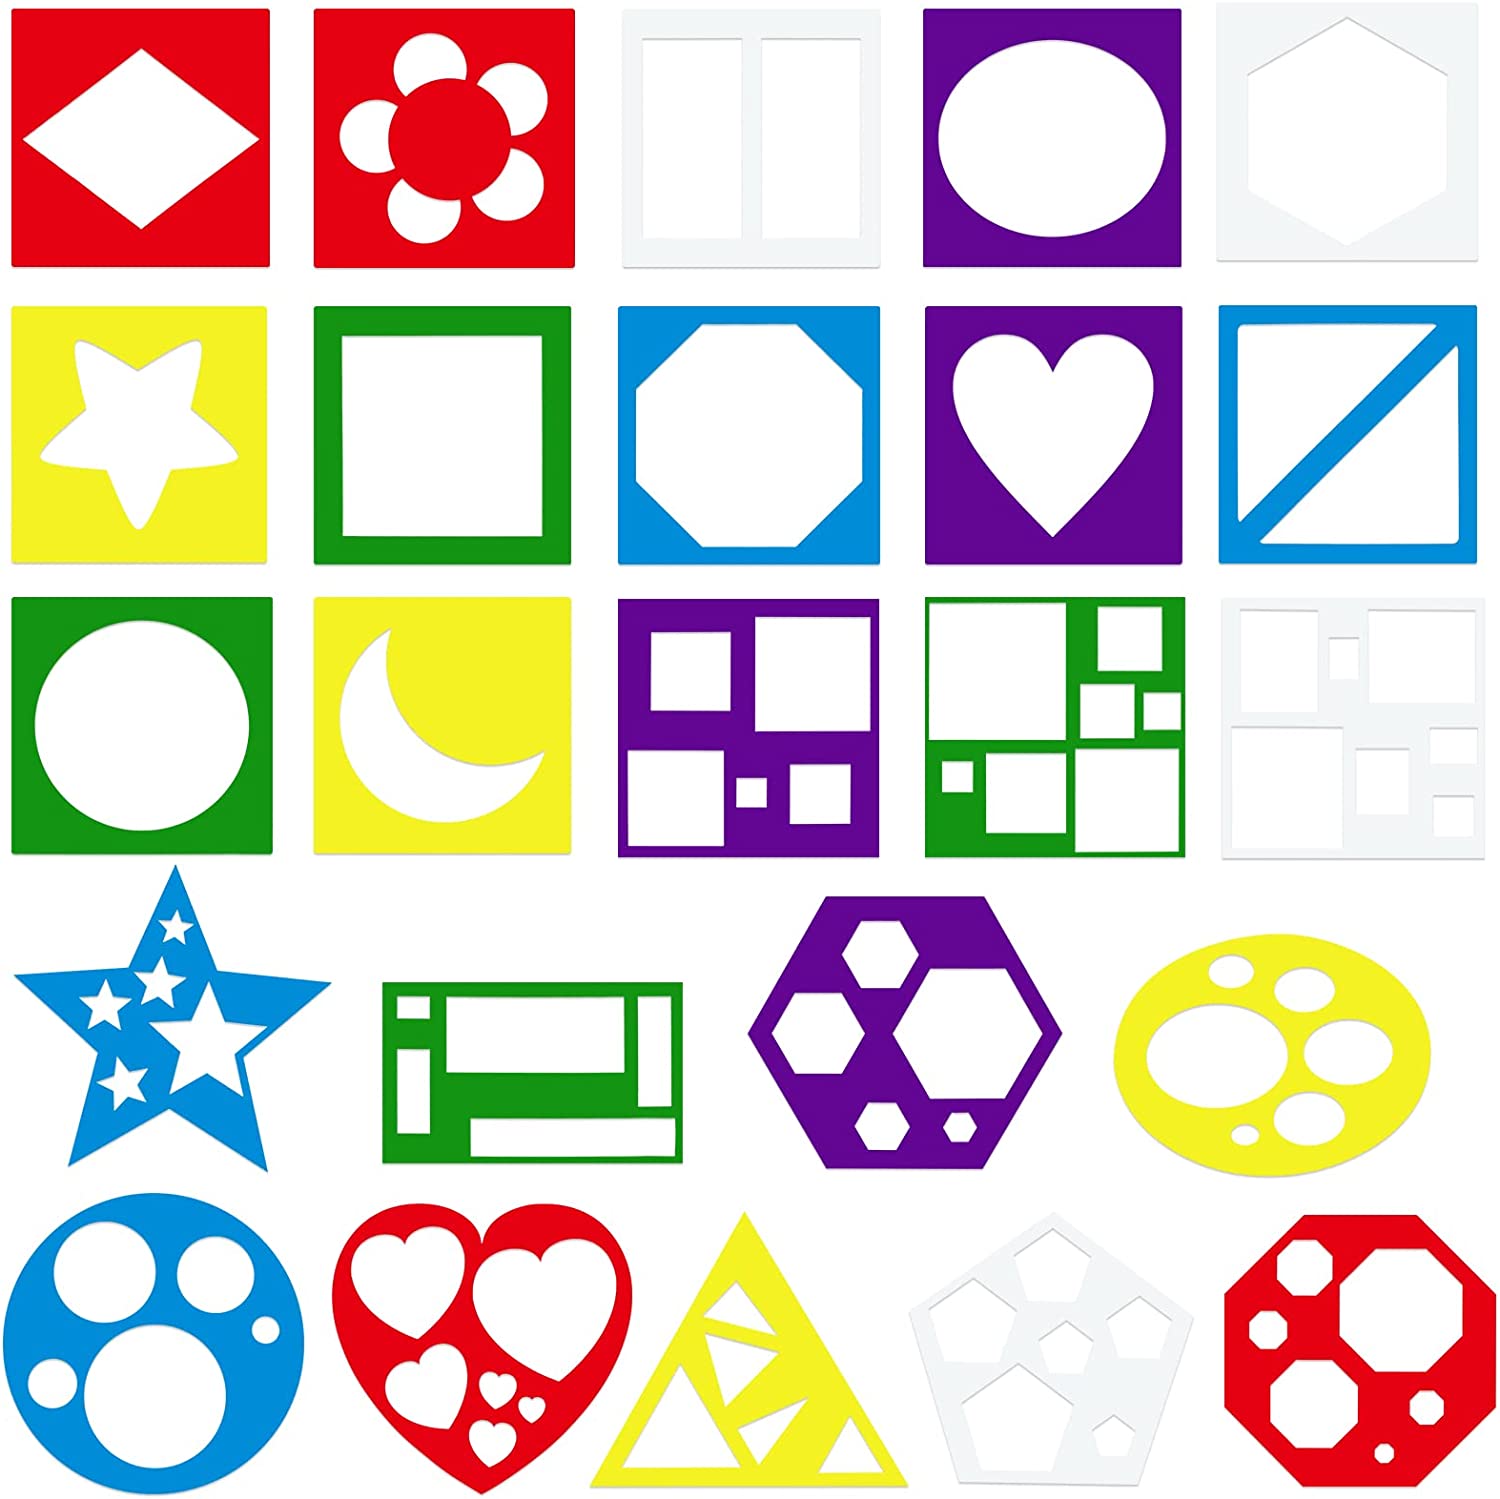  10 Pieces Geometric Shapes Stencils Template Set for Kids  Children Painting Craft,MWOOT Simple Shapes Colorful Drawing Stencils for  Drawin Learning : Arts, Crafts & Sewing